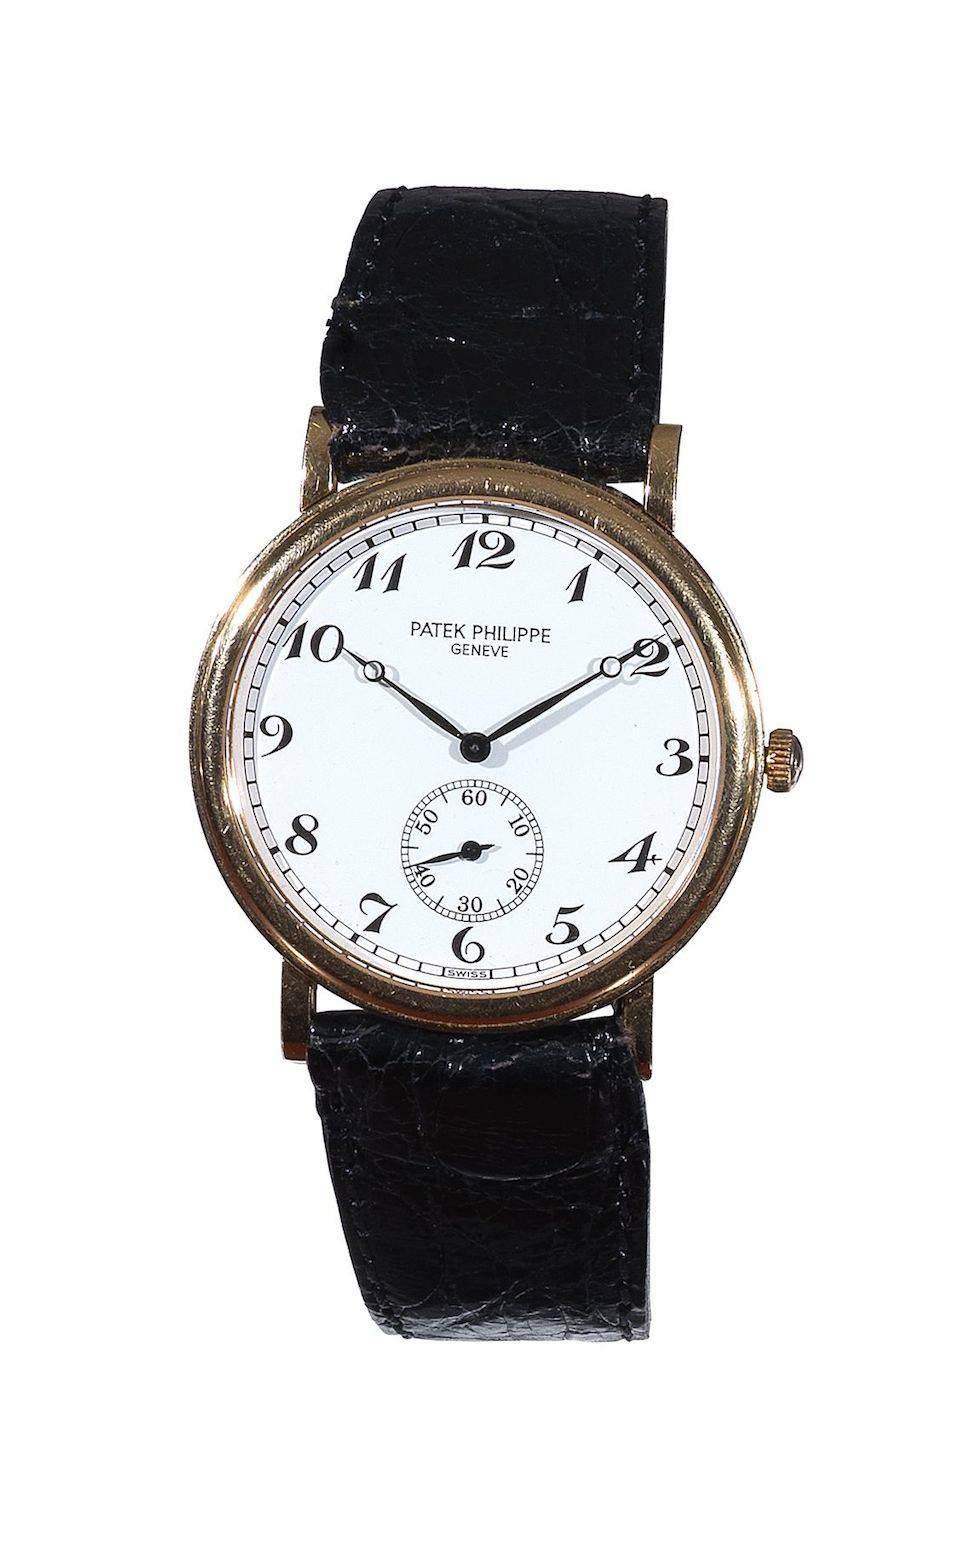 PLEASE NOTE: OUR PRICE IS FULLY INCLUSIVE OF SHIPPING, IMPORTATION TAXES & DUTIES.

Patek Philippe. A Yellow Gold Wristwatch with Breguet numerals.
Signed Patek Philippe, Geneve, ref. 5022, manufactured in 1999
Cal. 215 mechanical movement, 18